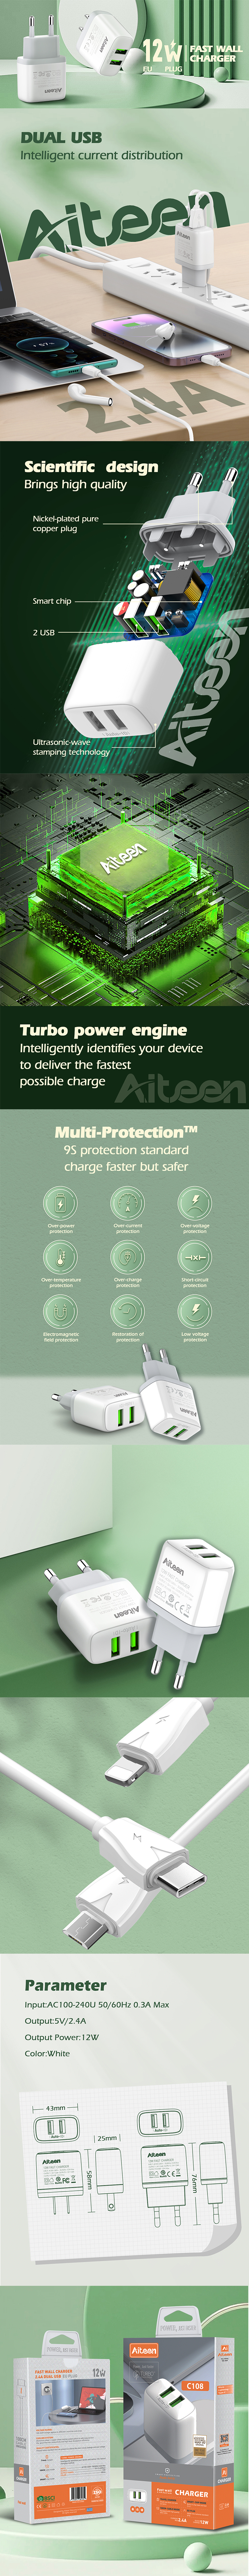 C108-C Charger 12W with Type-C Cable White Color